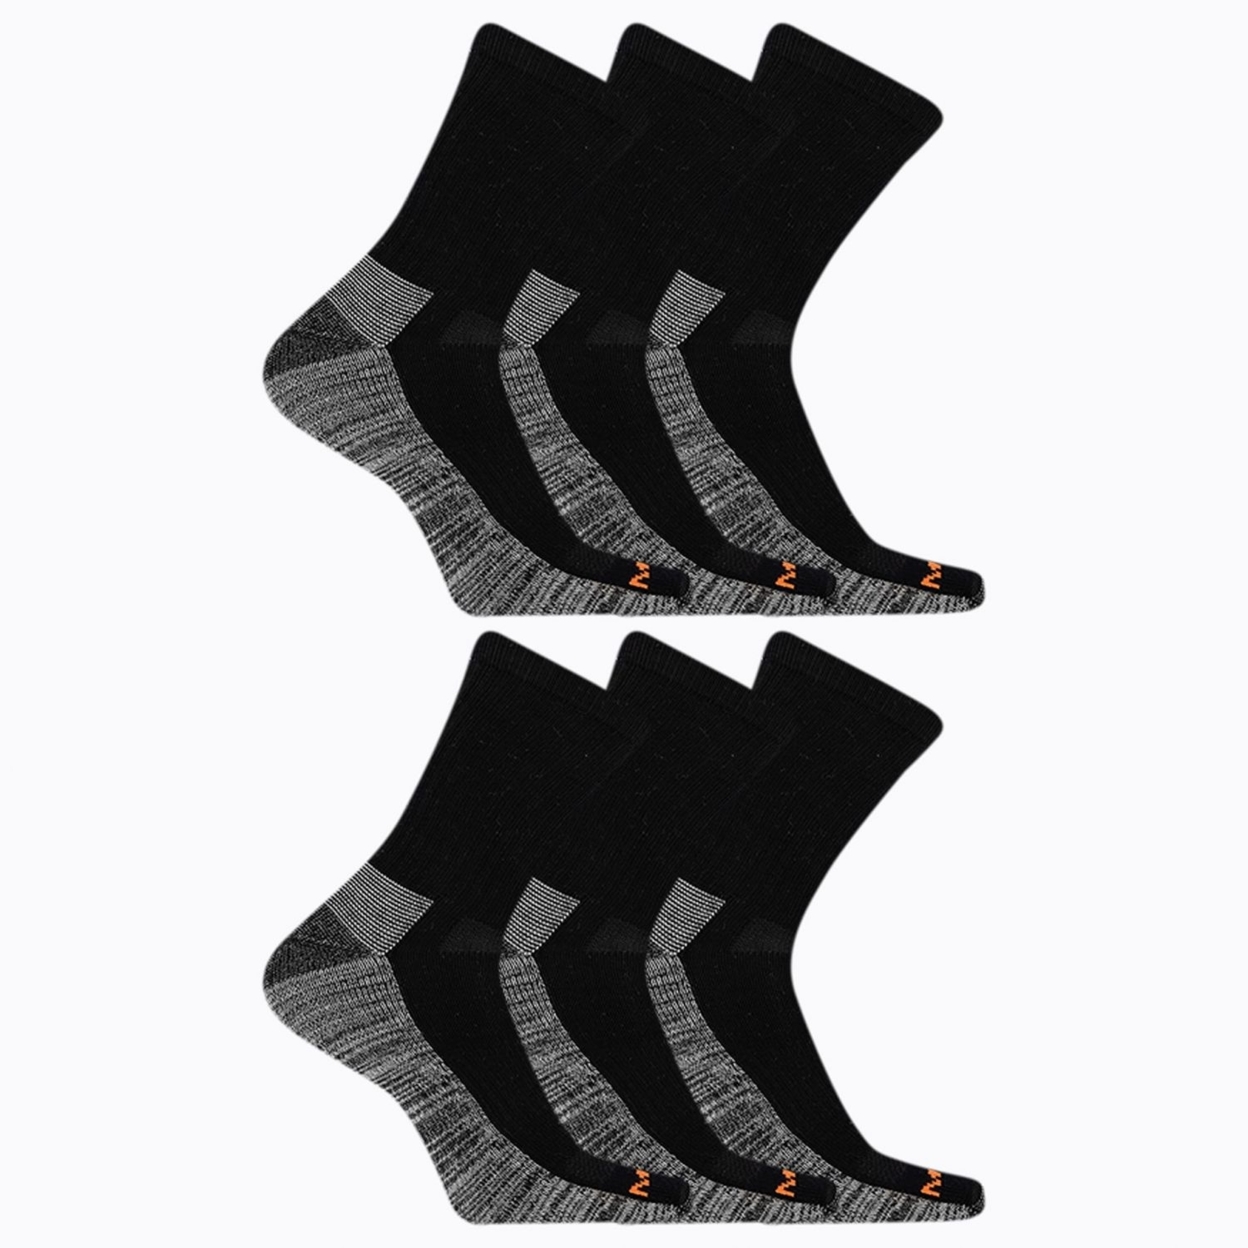 Merrell Men's And Women's Durable Everyday Work Crew Socks - Unisex 6 Pair Pack - Arch Support And Anti-Odor Cotton BLACK - BLACK, Large